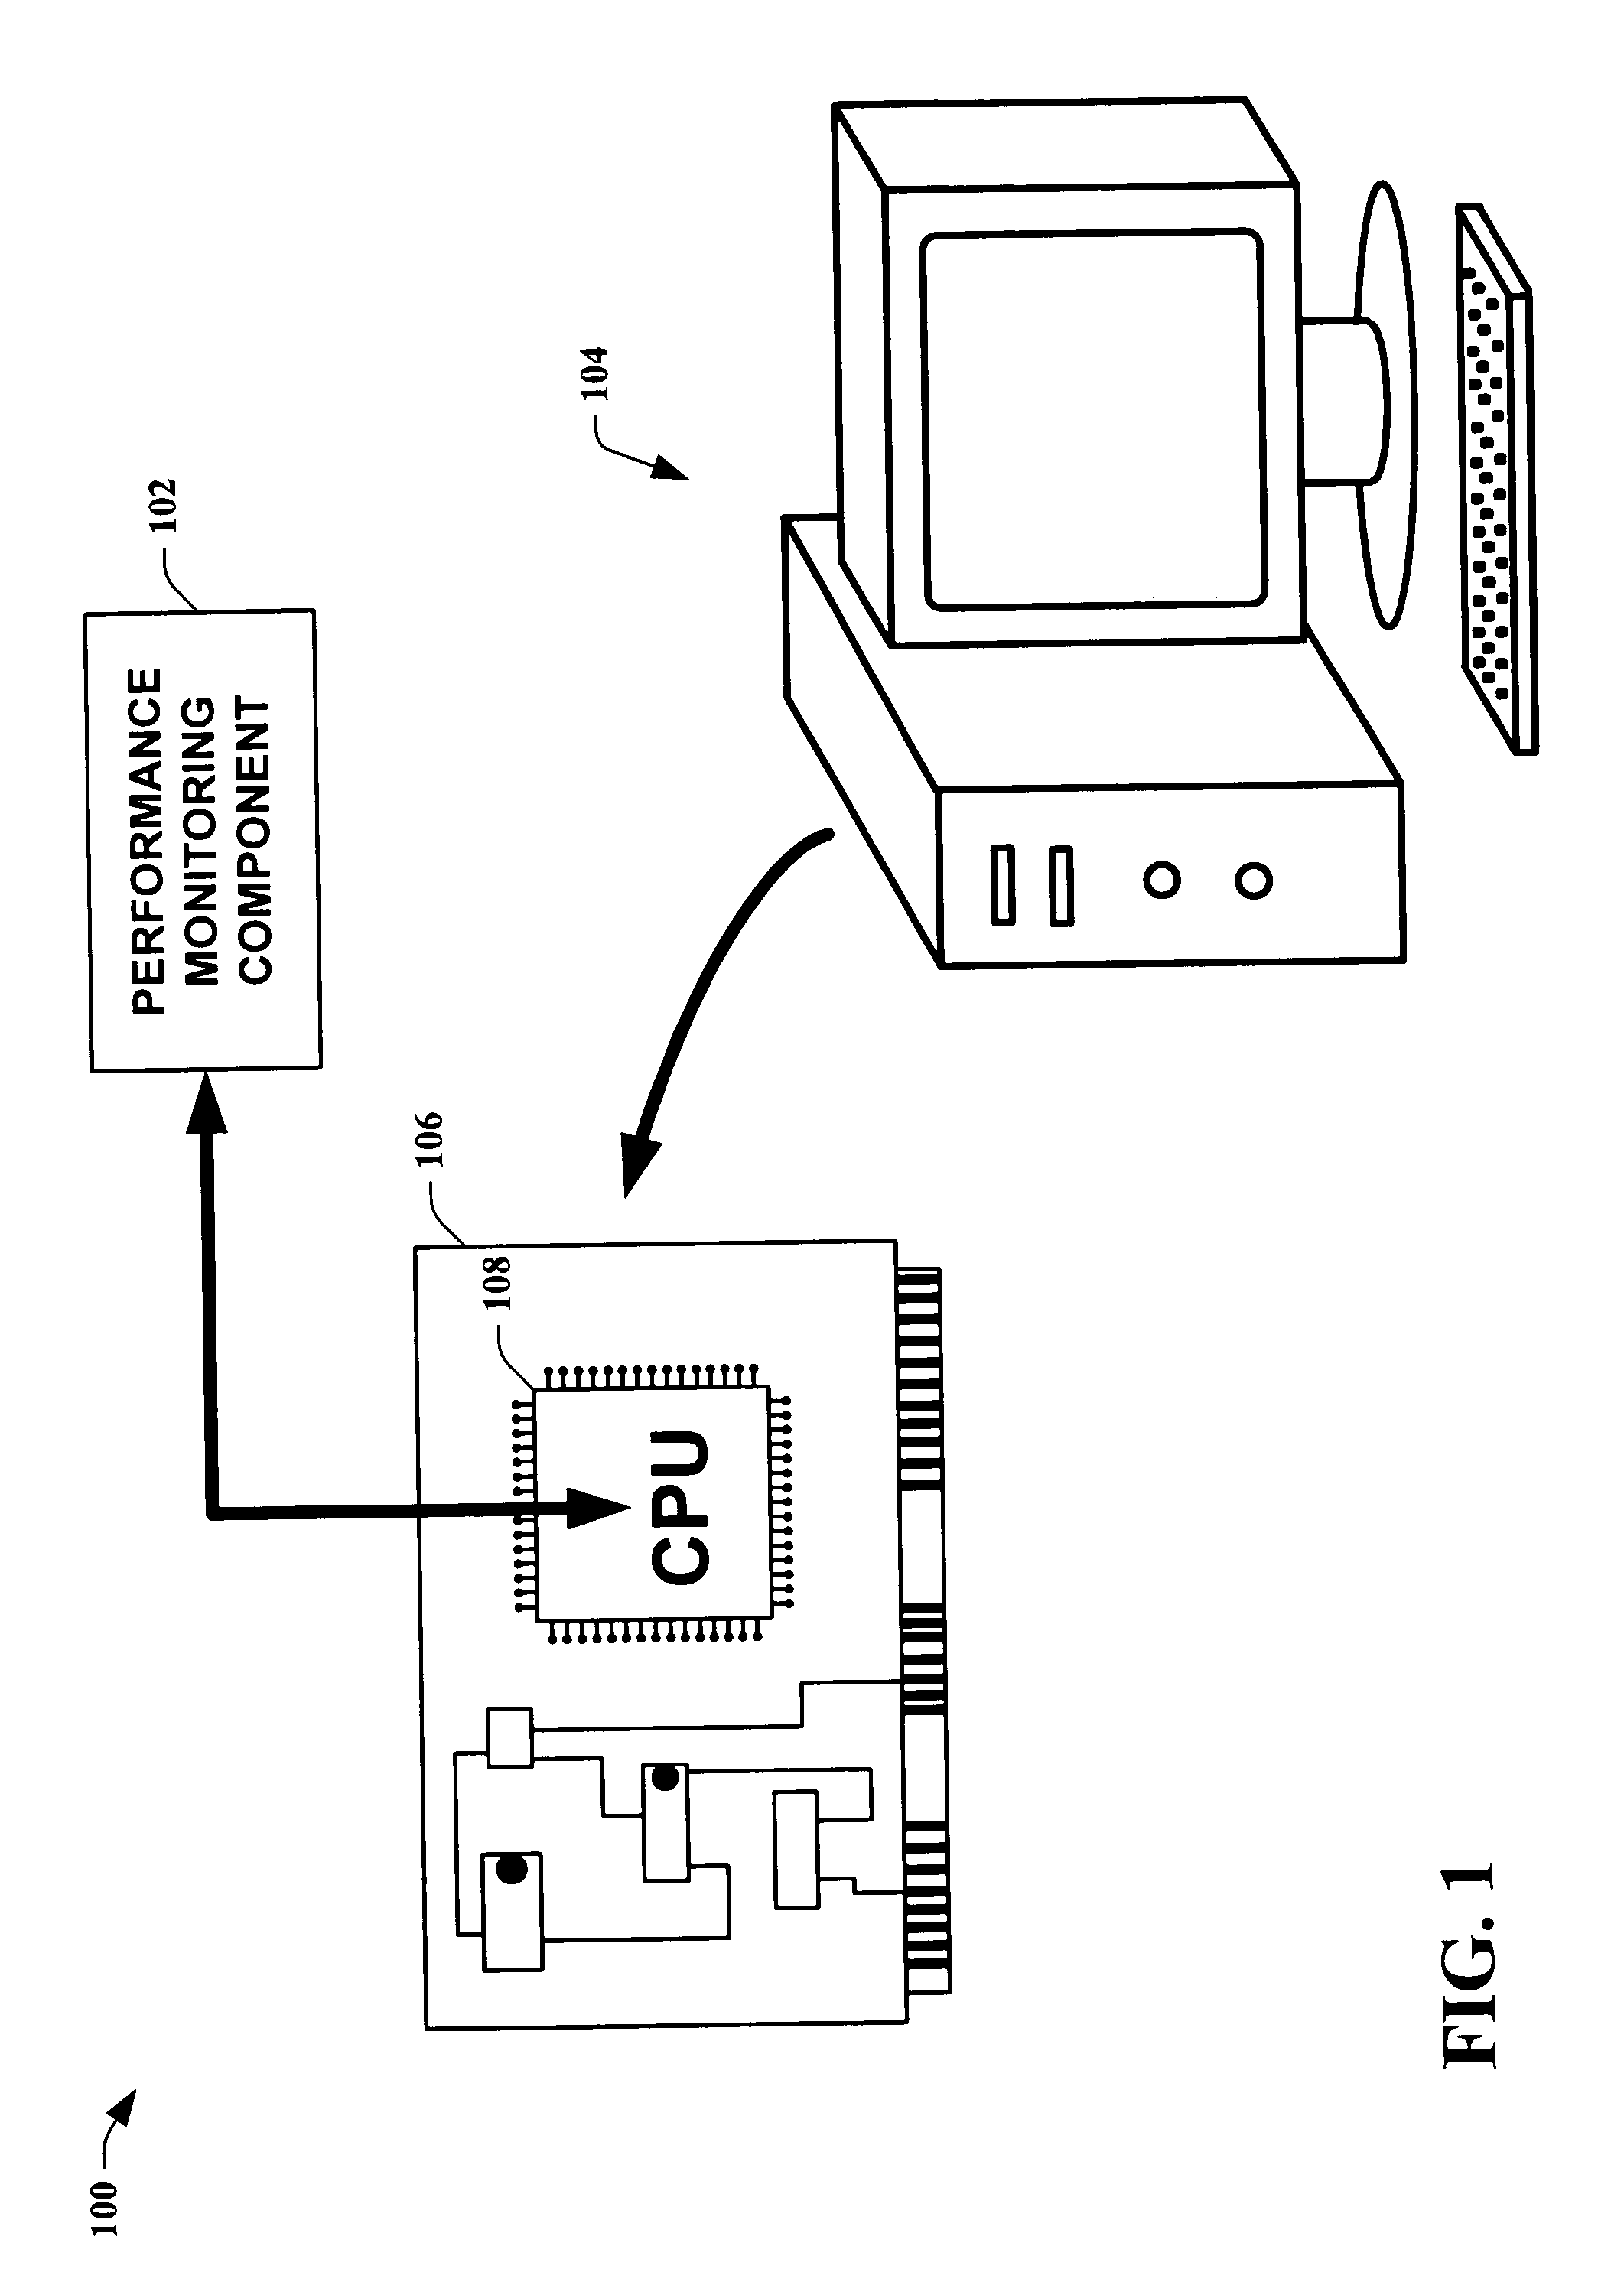 High performance counter for realistic measurement of computer system load